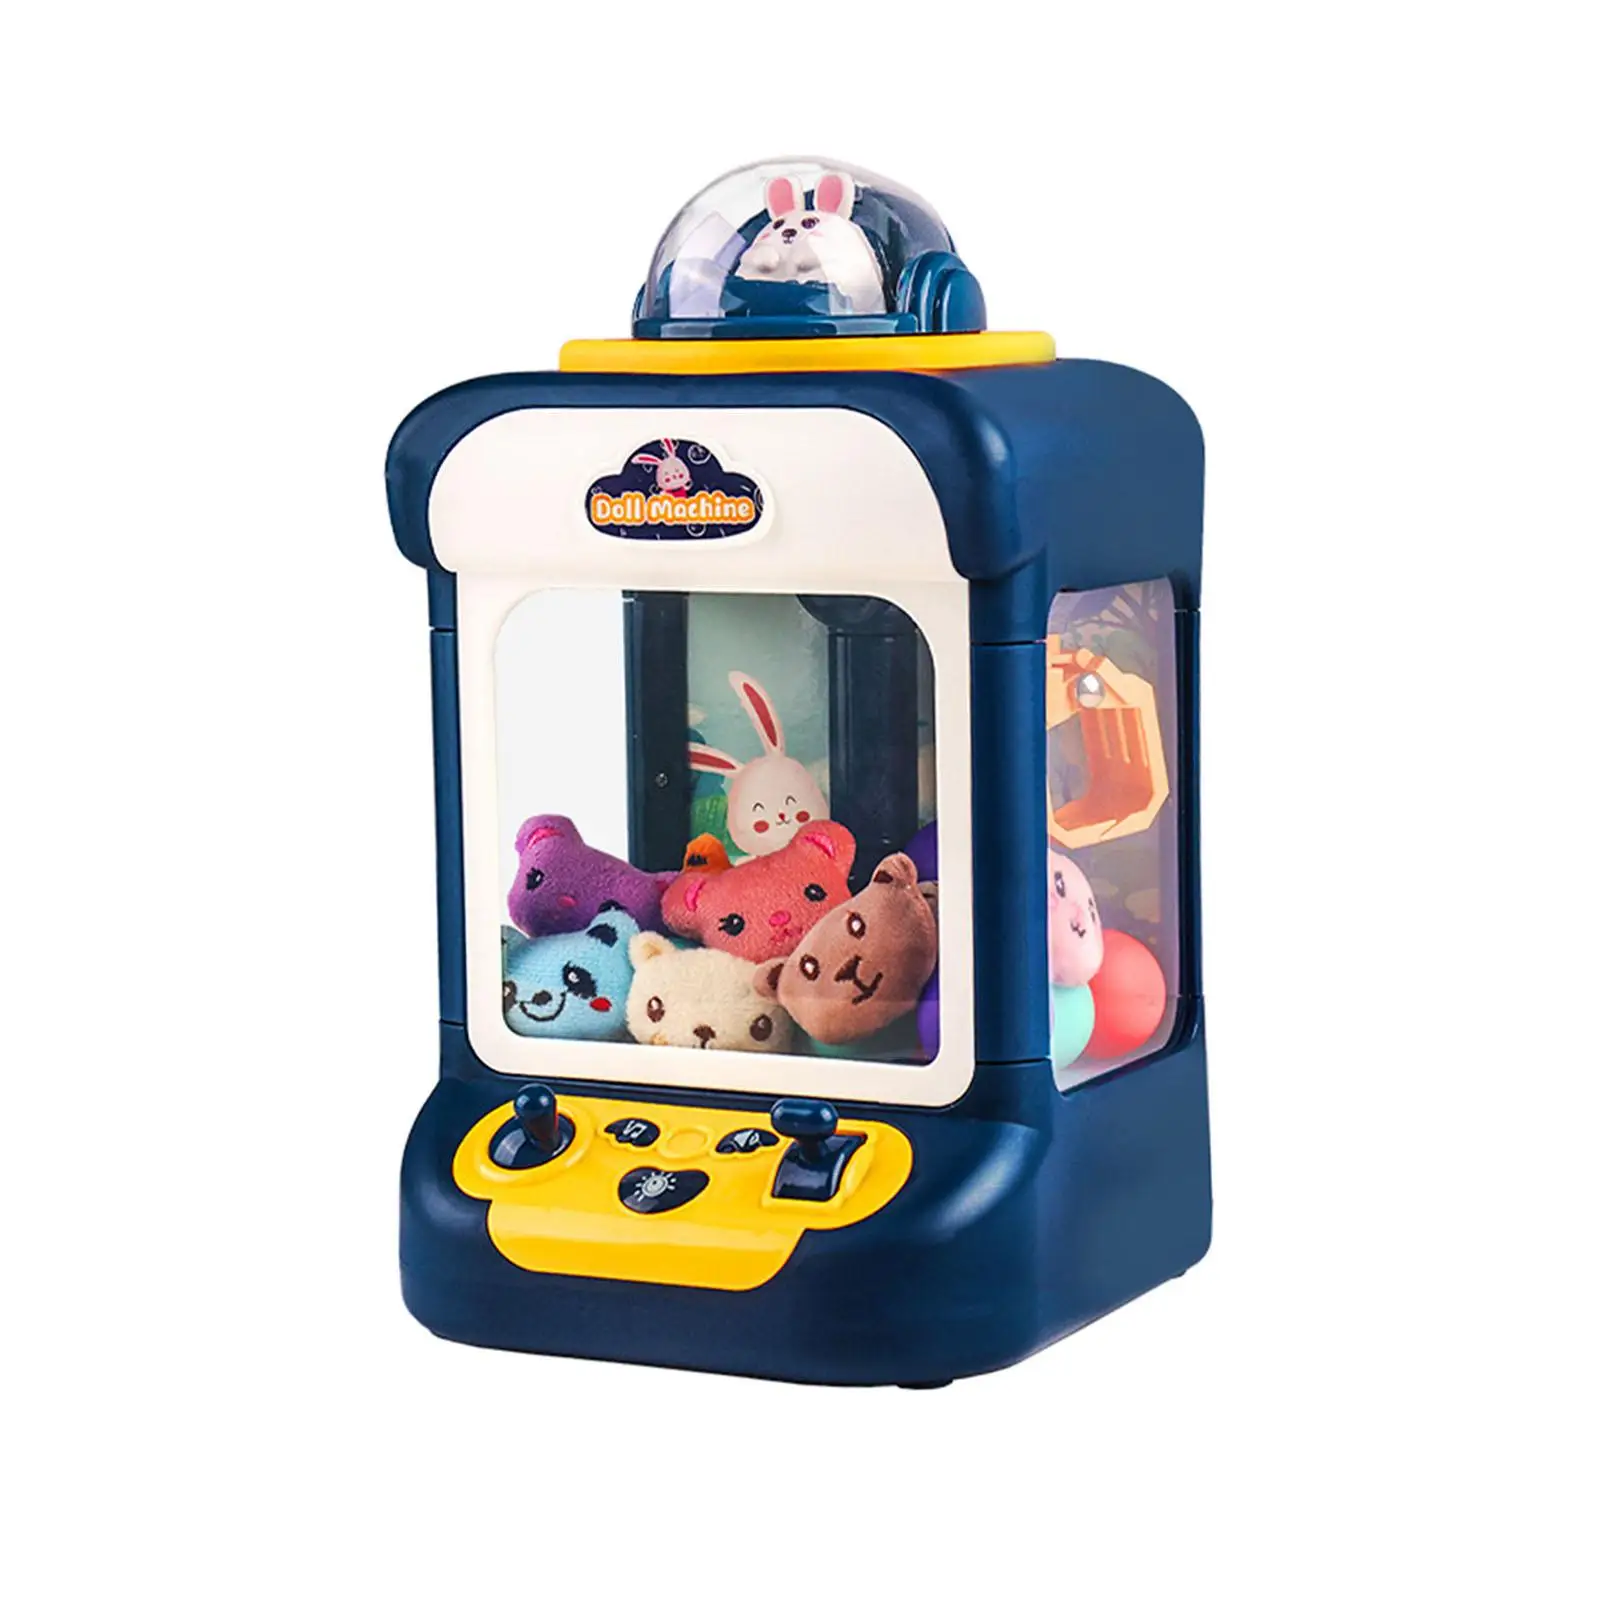 Manual Claw Machine Toy with Sounds Dolls Vending Grabber Machine for Kids